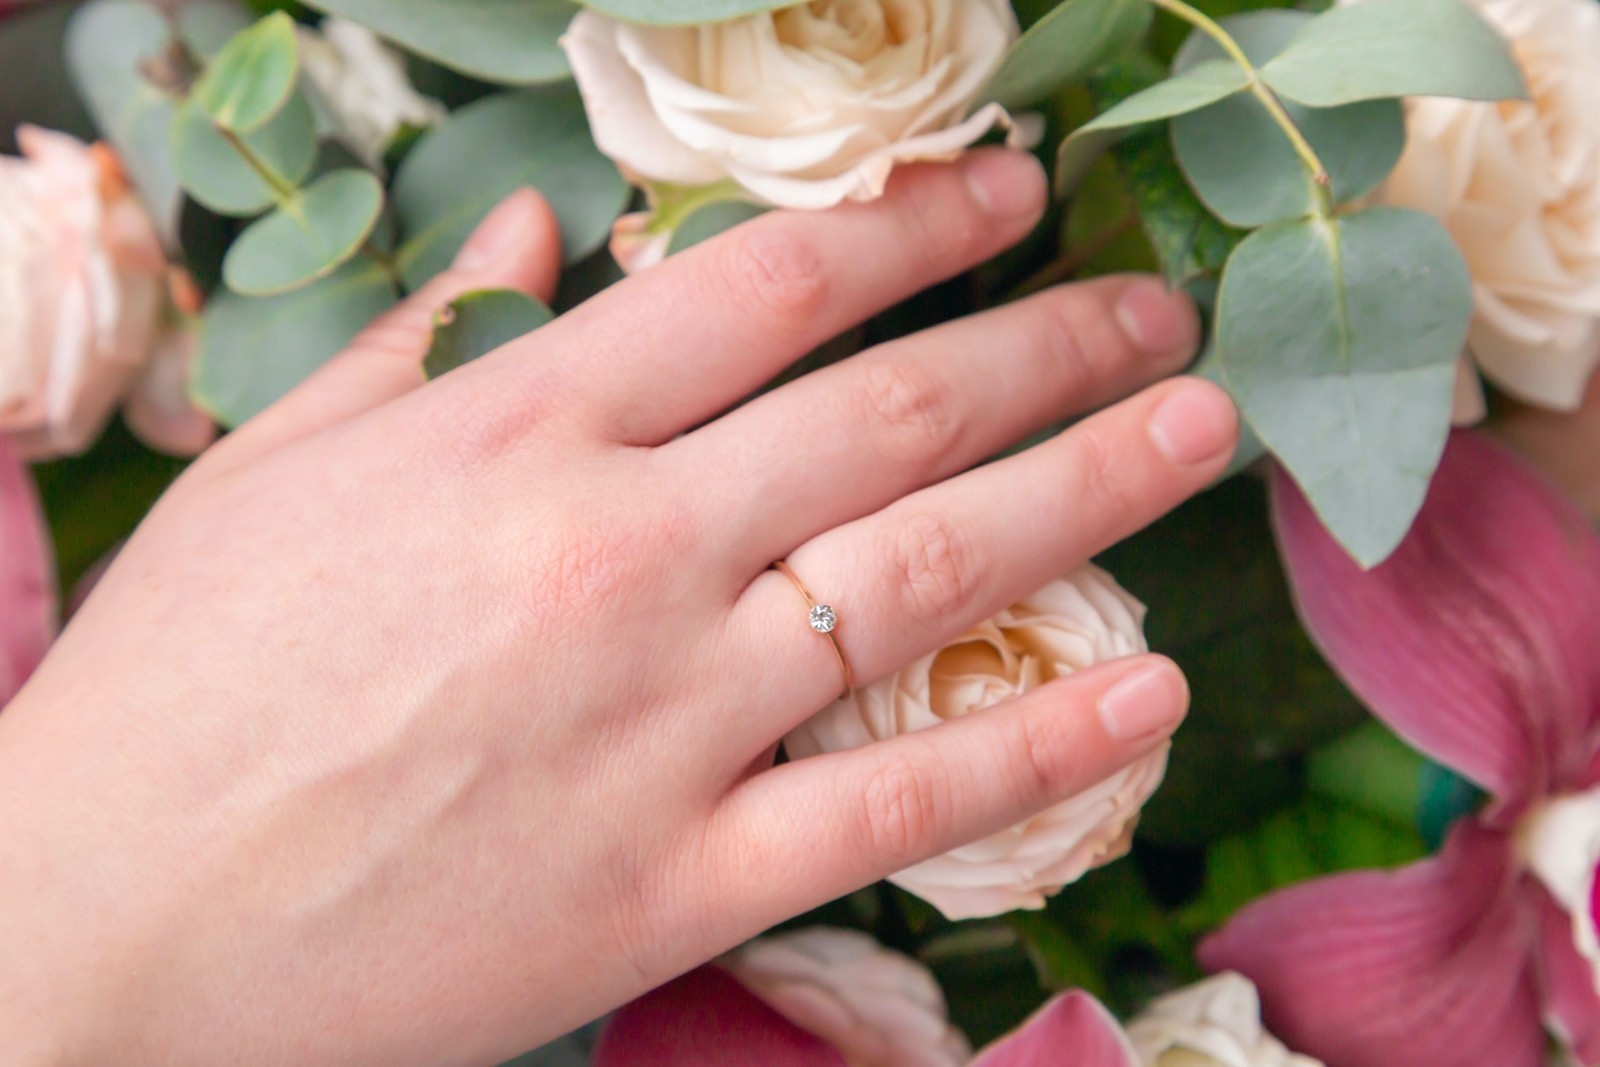 person wearing gold wedding band holding white rose